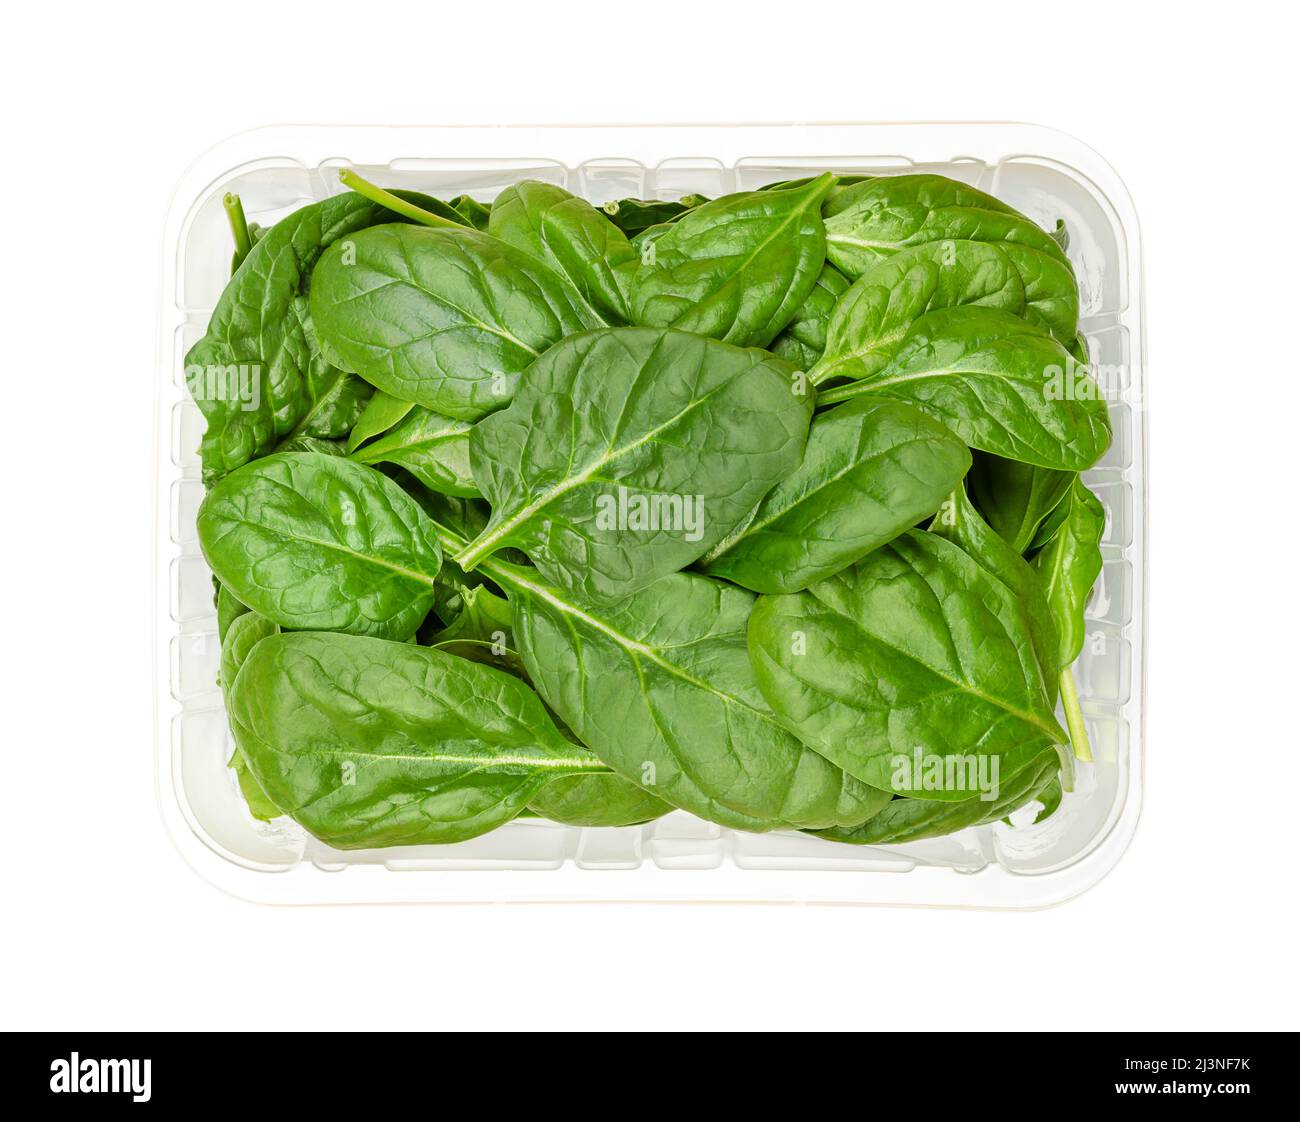 Young spinach leaves in a plastic container. Fresh picked and raw Spinacia oleracea, green leaf vegetable, rich on vitamin K. Stock Photo